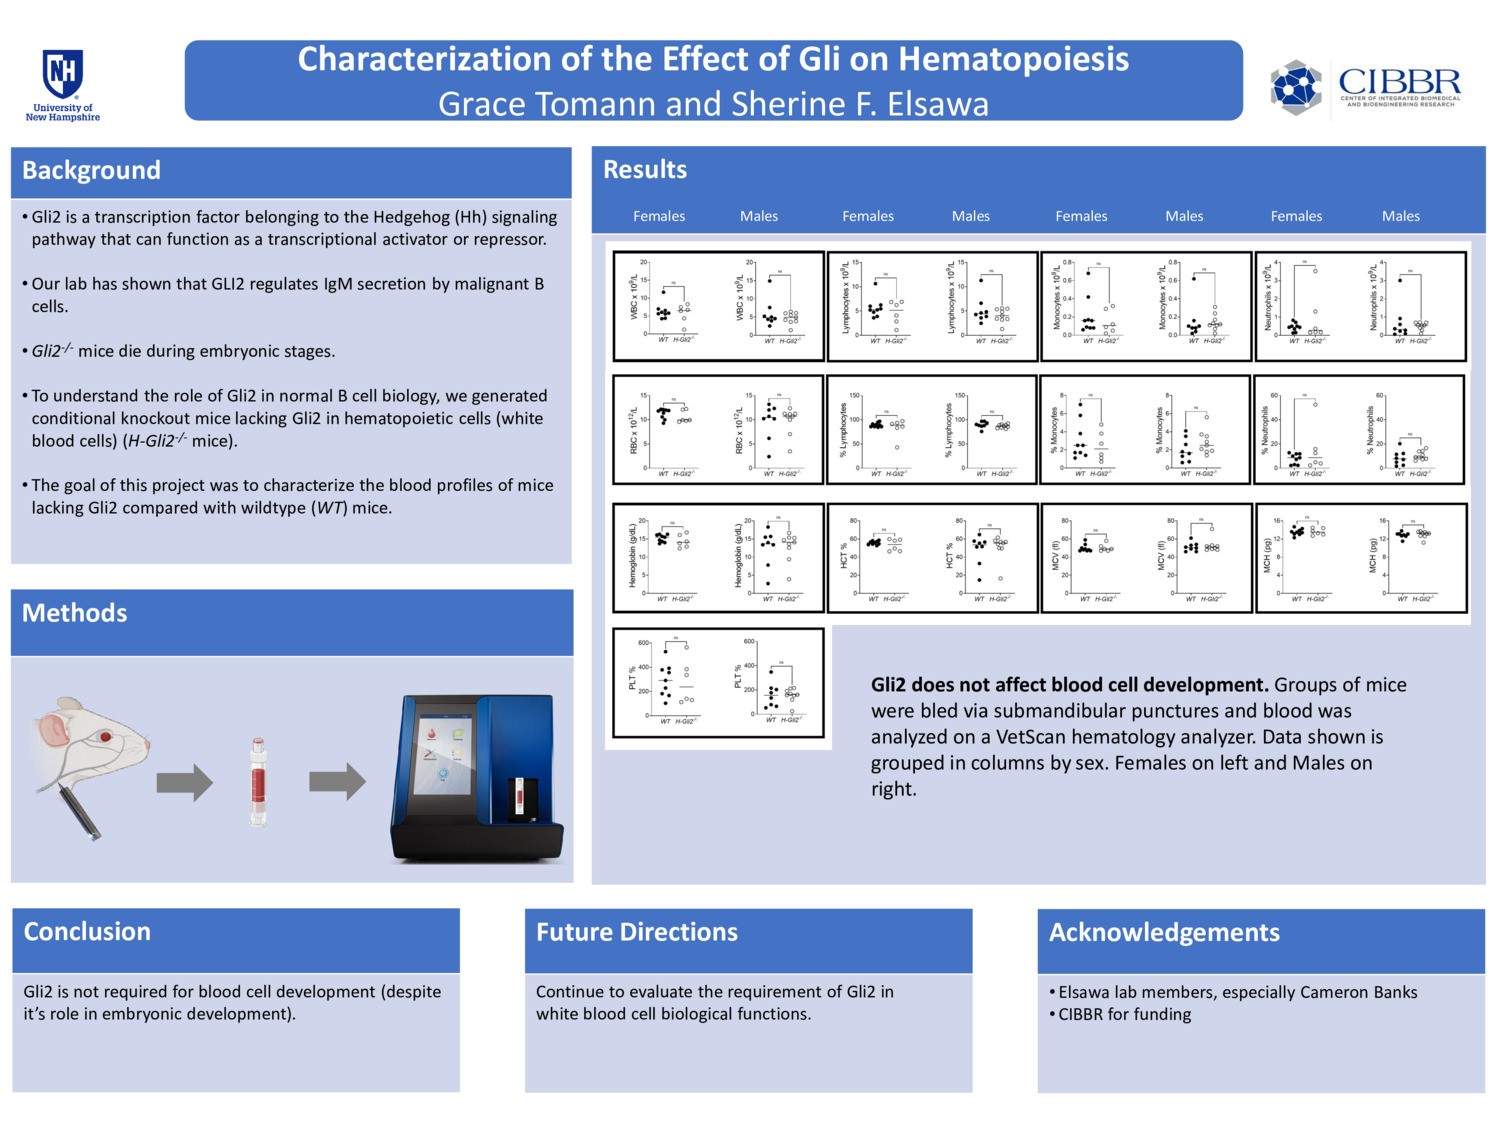 Characterization Of The Effect Of Gli Oh Hematopoiesis by gtomann